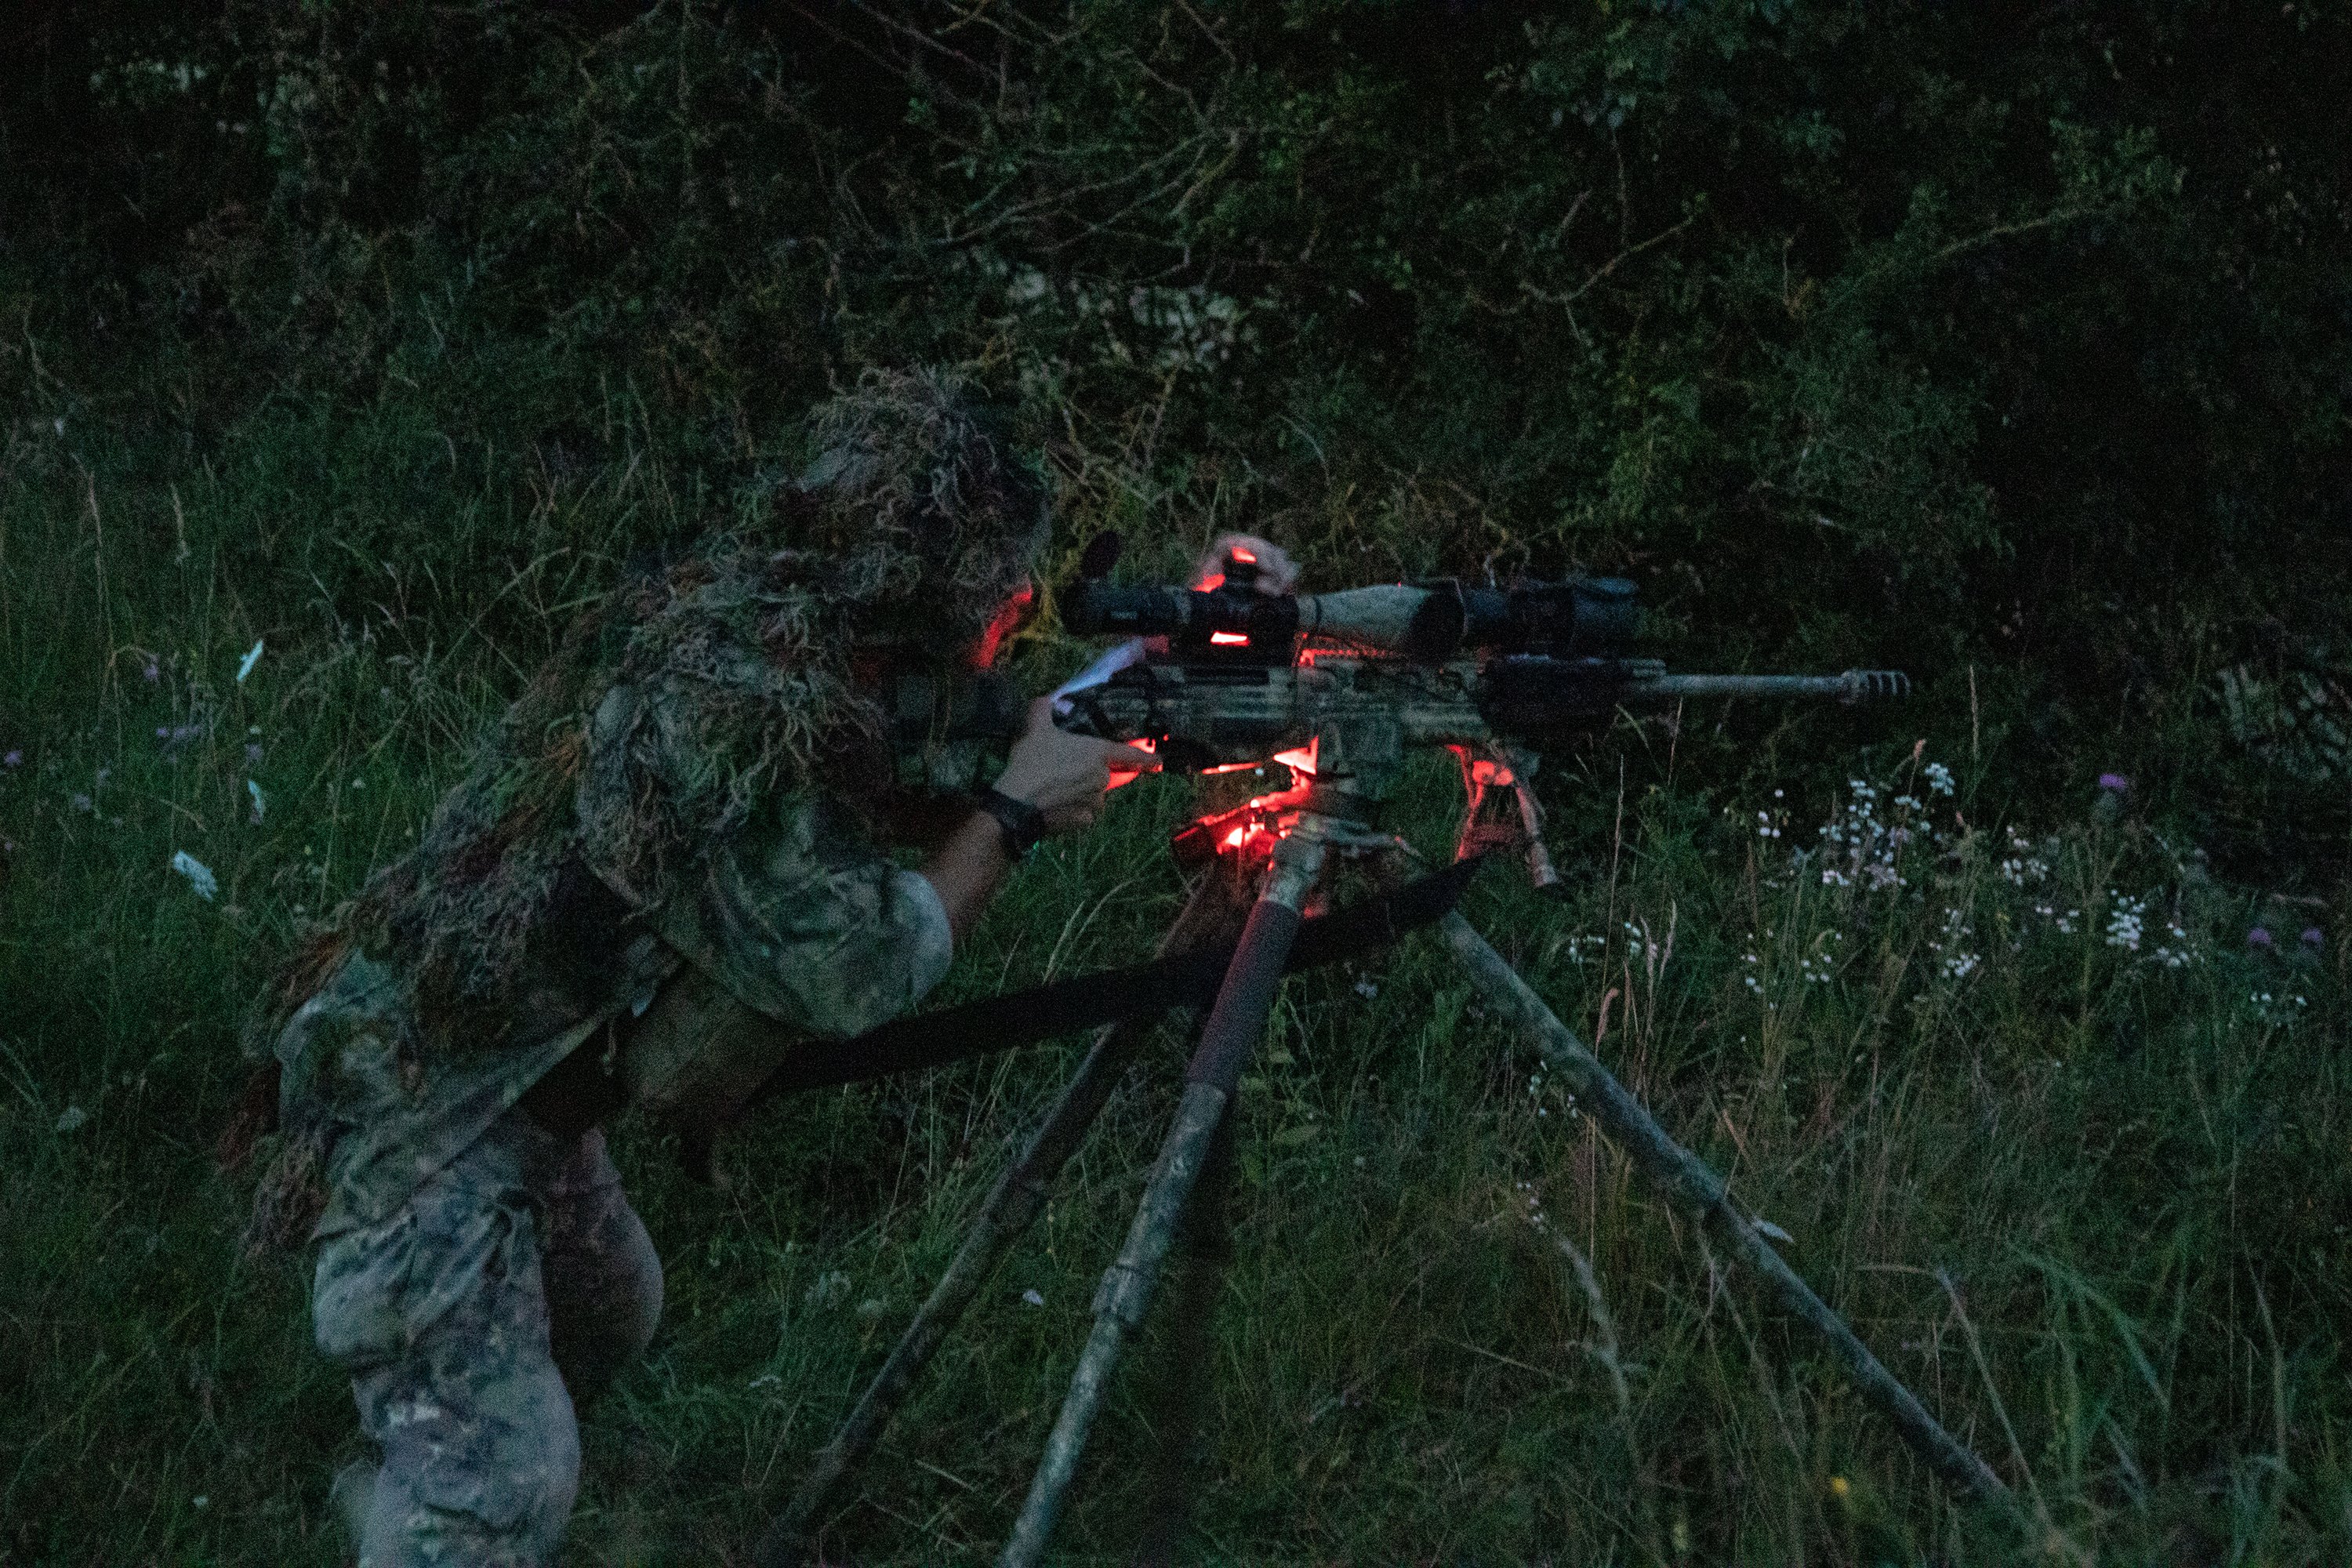 Sniper teams square off at Army facility in Germany to find